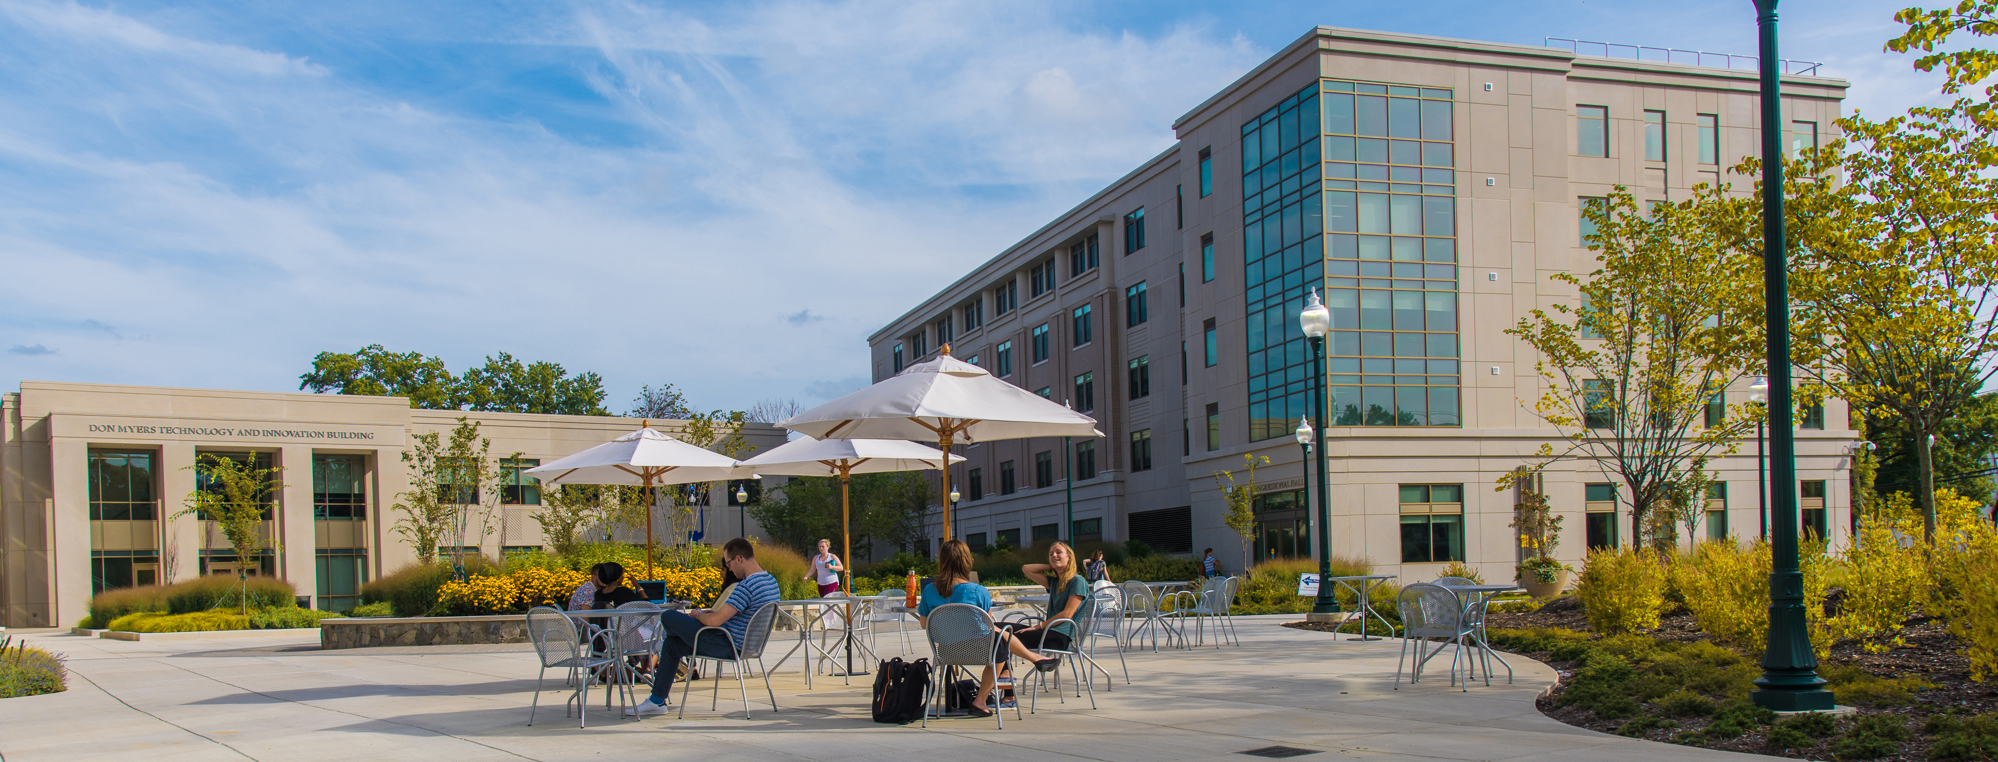 East Campus Commons Outdoor Seating